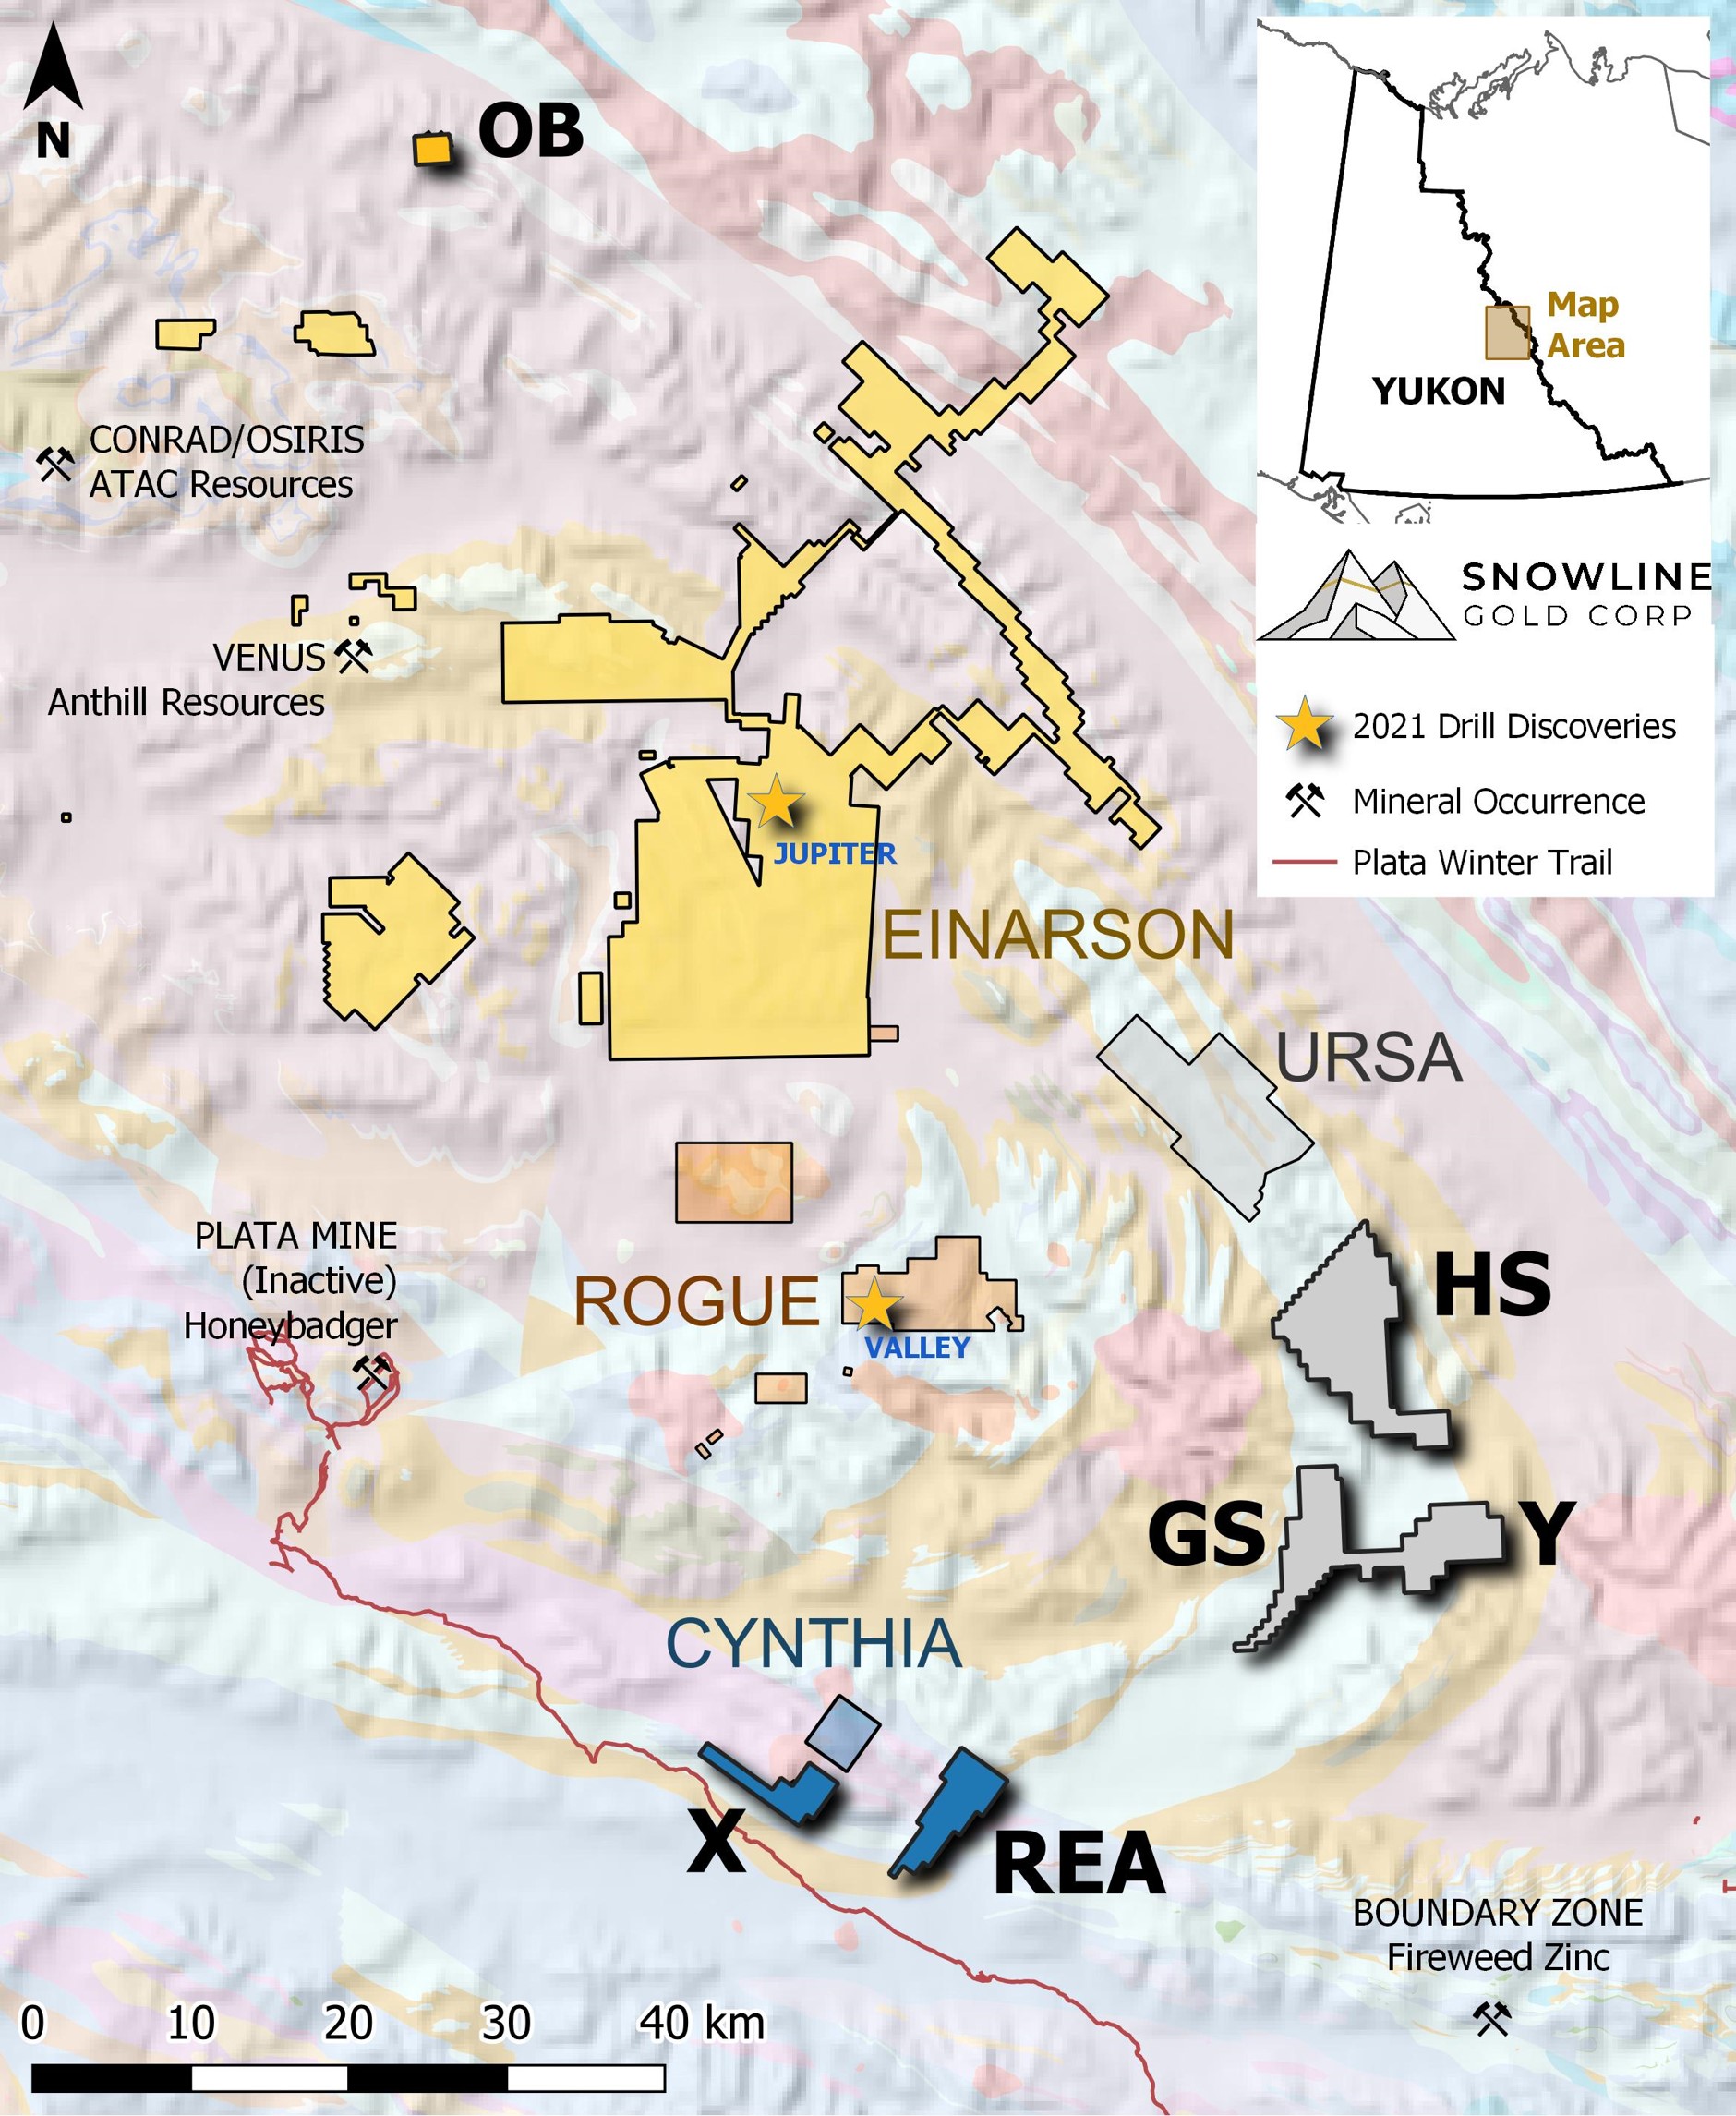 Snowline Gold Corp., Tuesday, September 14, 2021, Press release picture